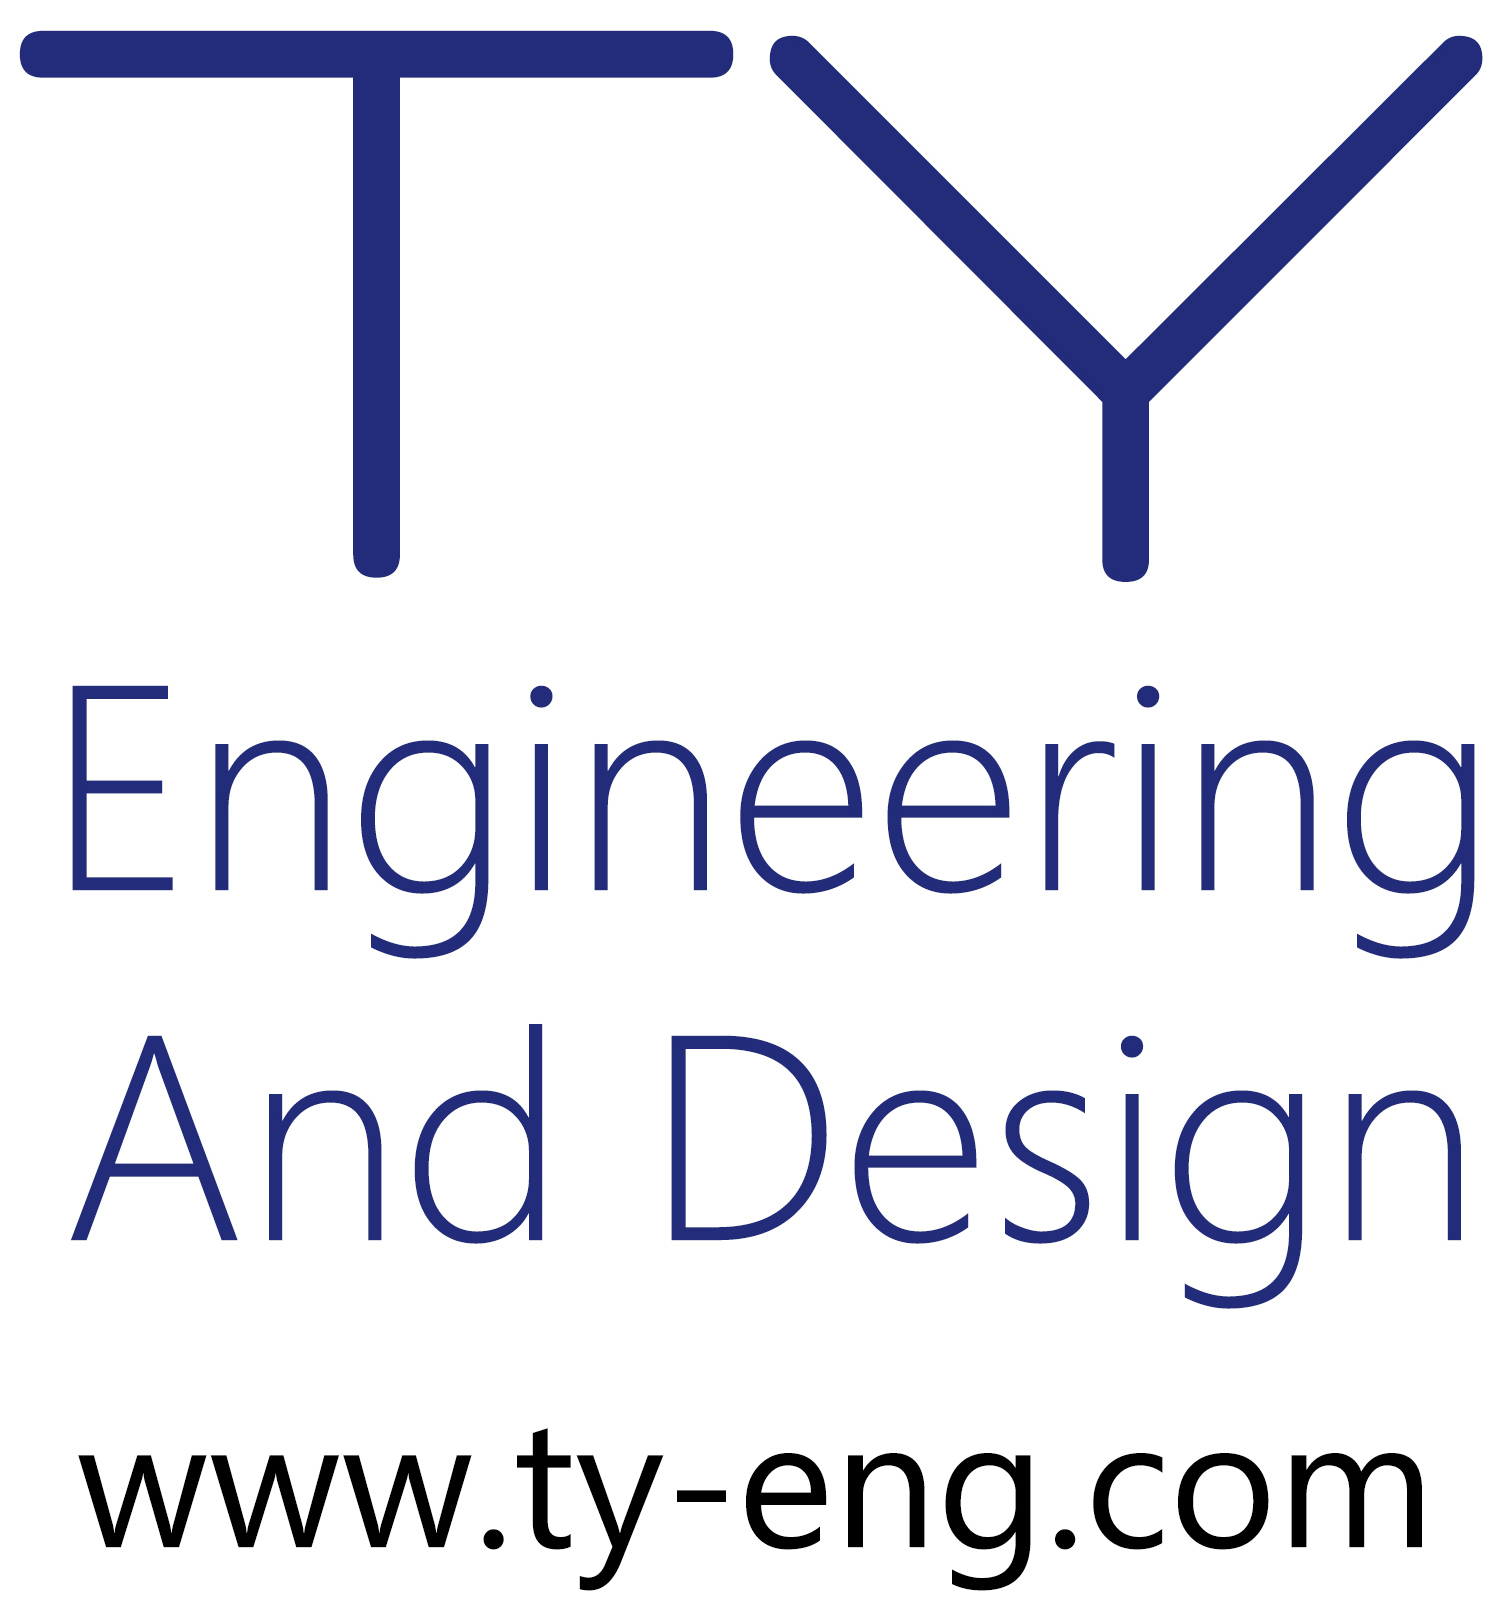 TY Engineering and Design, Inc. Logo